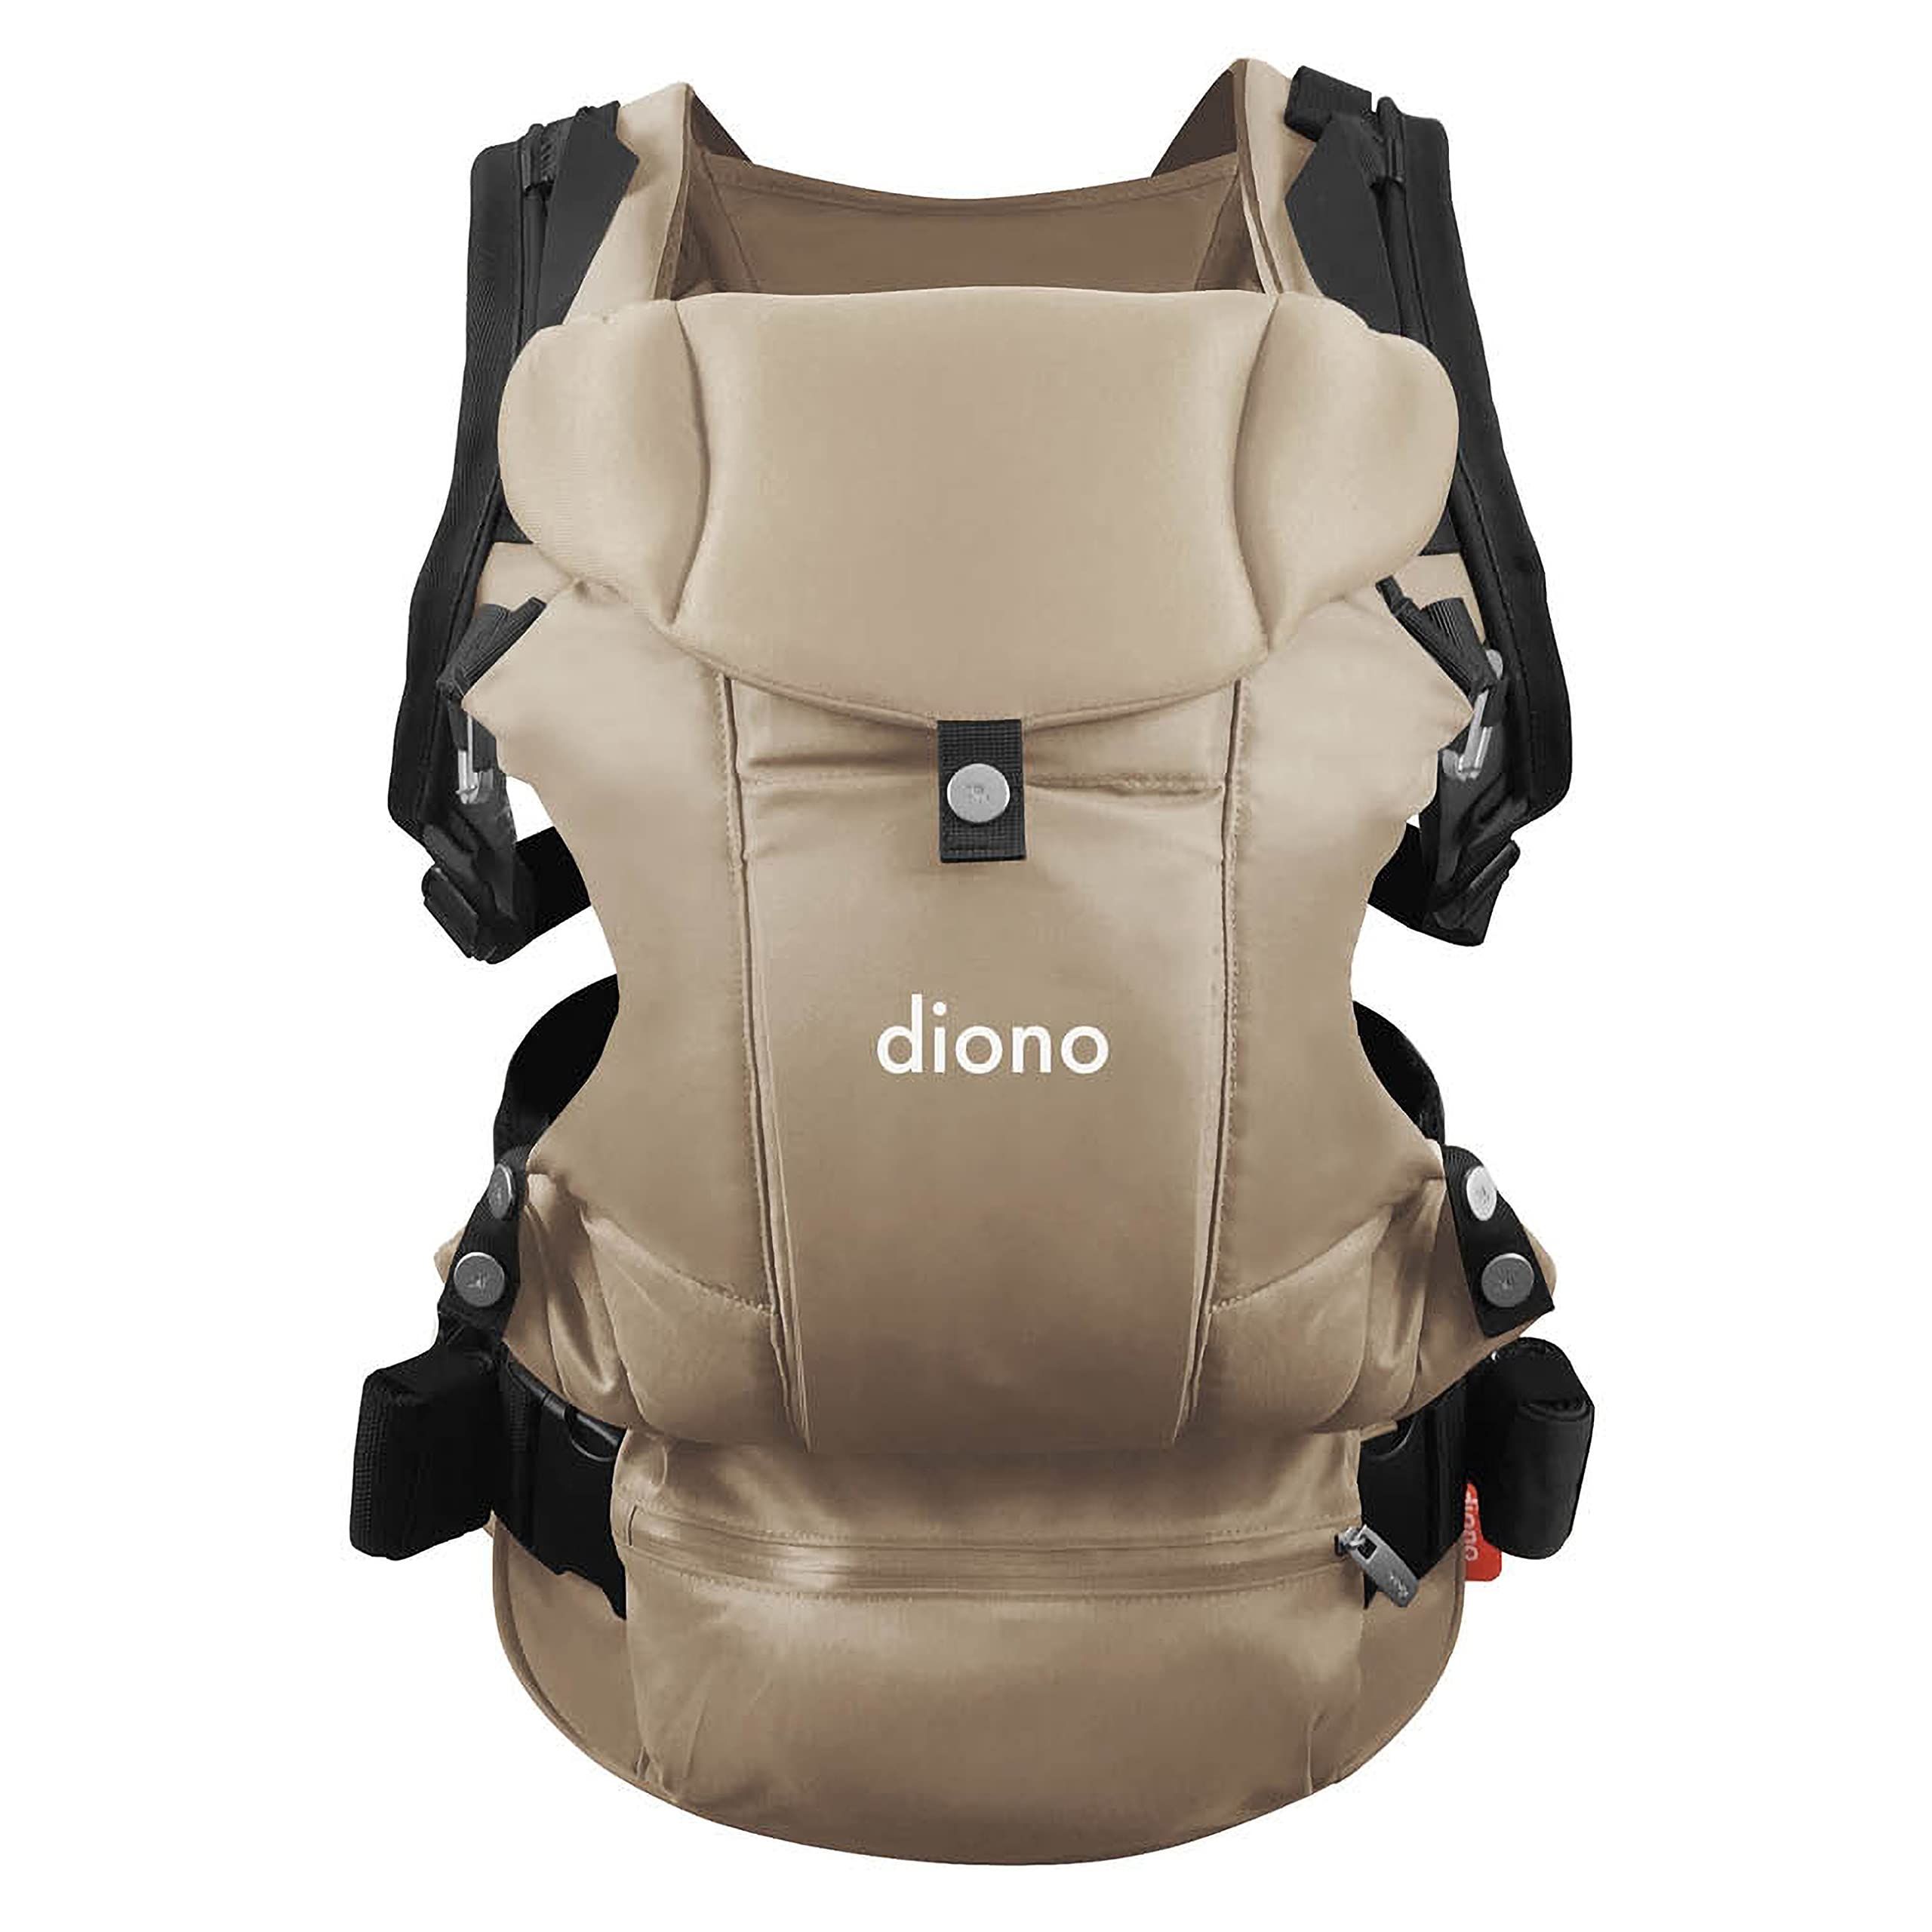 Diono Carus Essentials 3-in-1 Baby Carrier, Front Carry & Back Carry, Newborn to Toddler up to 33 lb / 15 kg, Easy to Wear Comfortable & Ergonomic, Sand